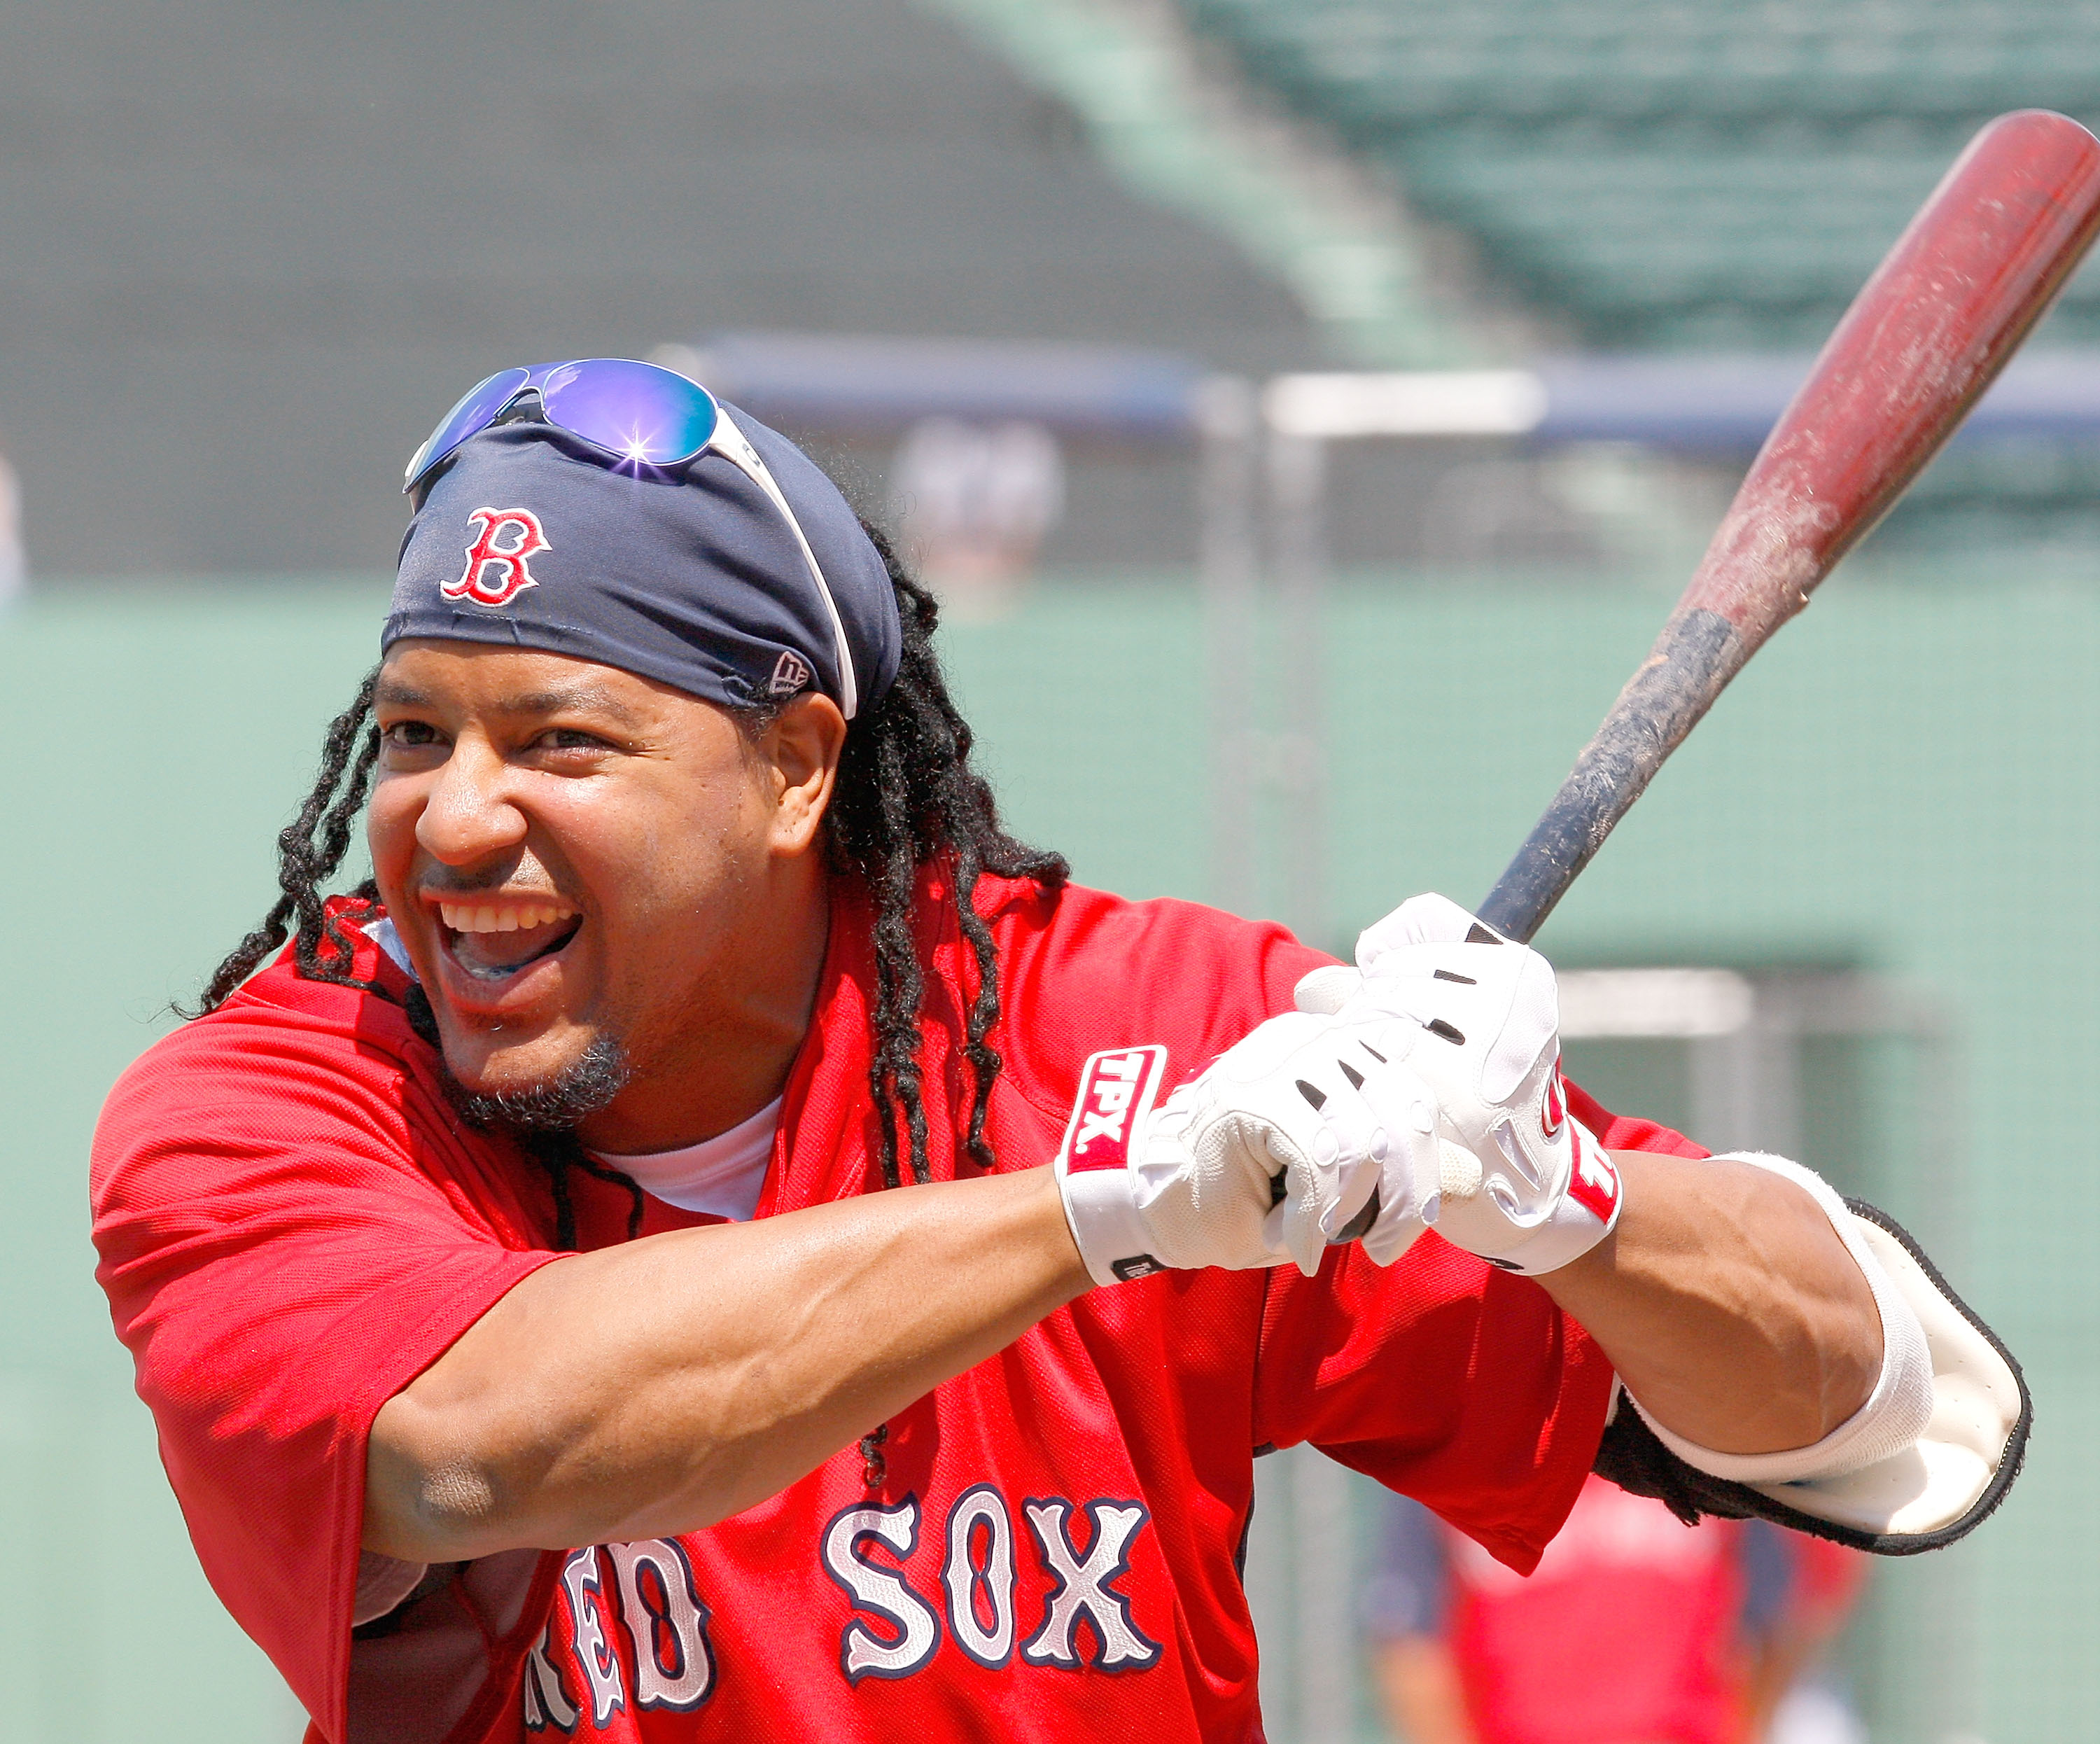 BOSTON - JULY 26:  Manny Ramirez #24 of the Boston Red Sox laughs during batting practice before a game with the New York Yankees at Fenway Park on July 26, 2008 in Boston, Massachusetts.  (Photo by Jim Rogash/Getty Images)